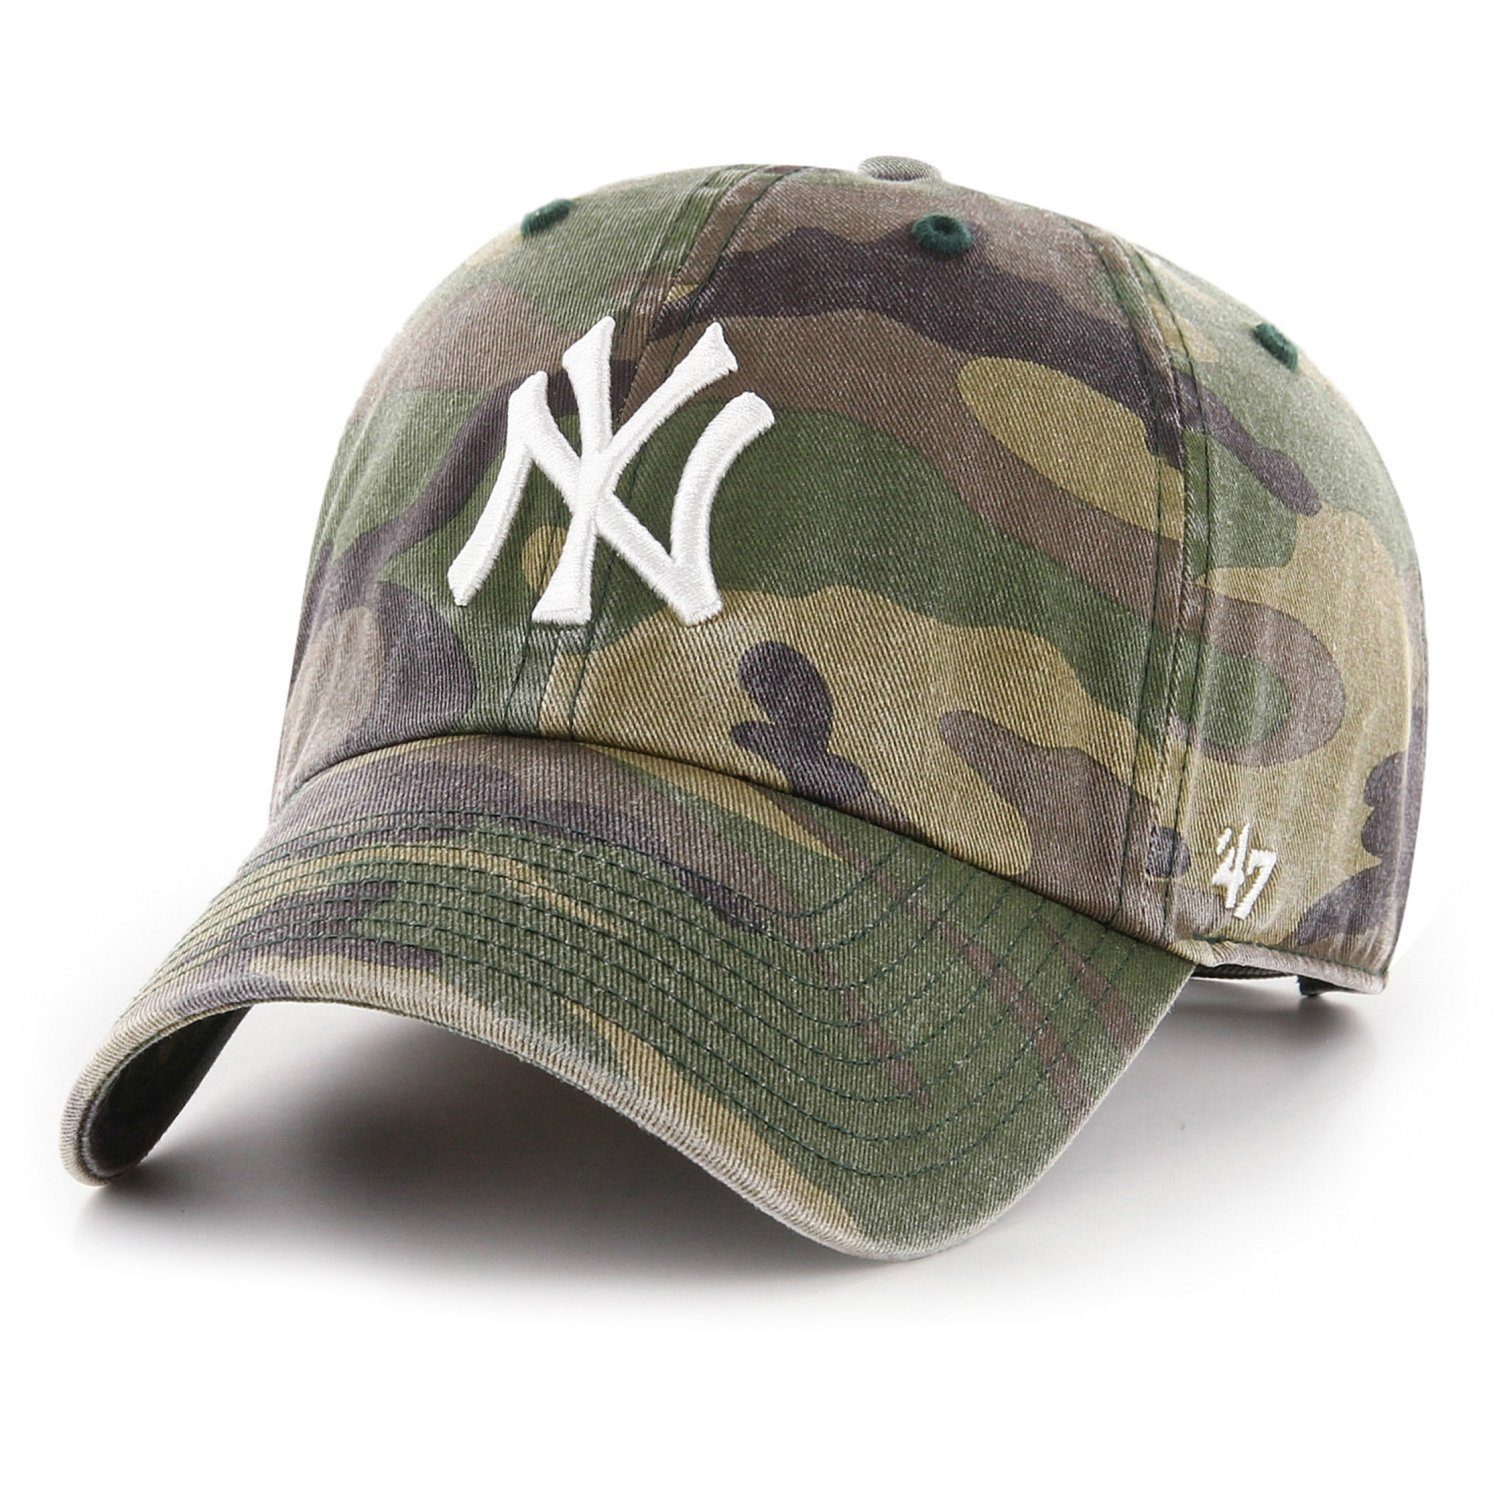 York New Yankees Cap Brand Relaxed '47 Fit Baseball WASHED